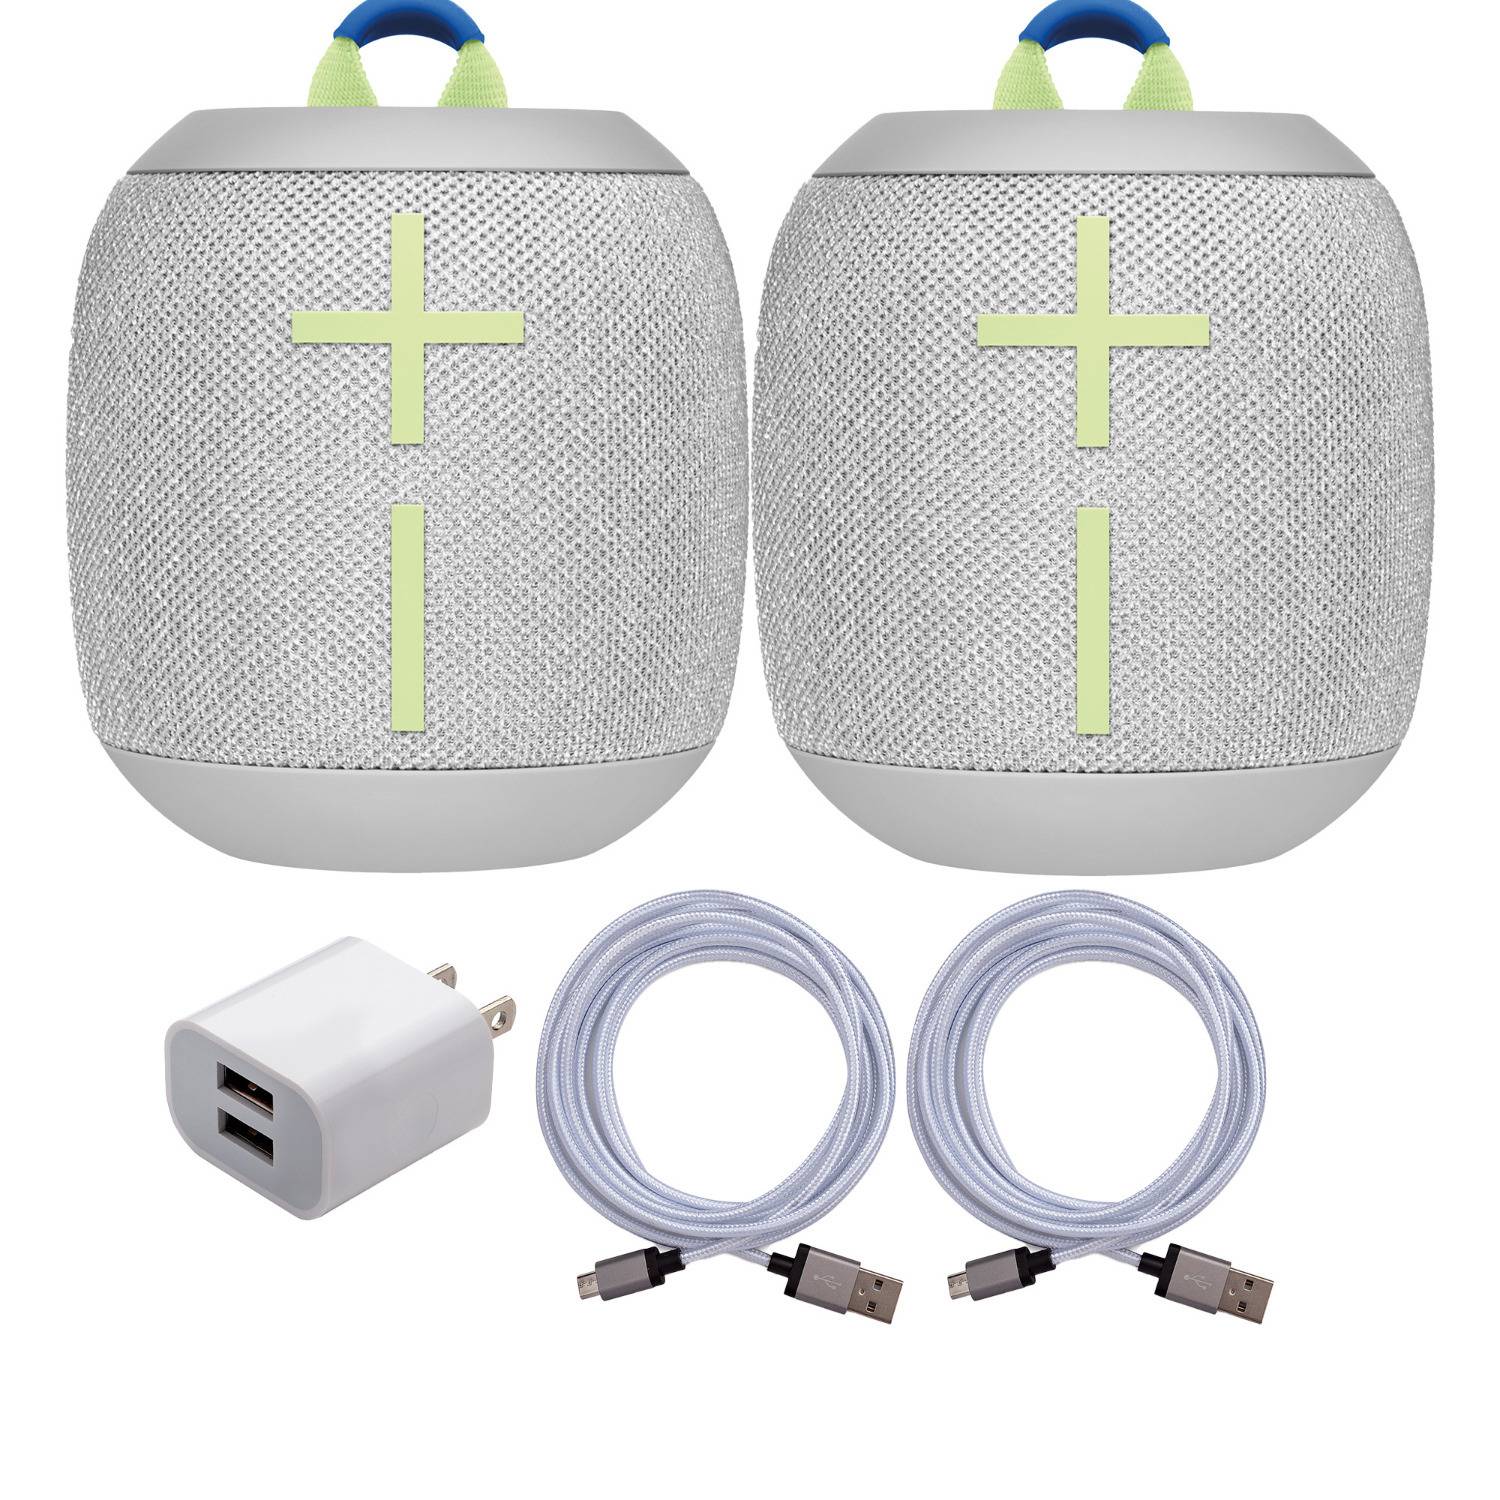 Ultimate Ears WONDERBOOM 3 Bluetooth Speakers (Joyous Bright, 2-Pack) with Cables and AC Adapter